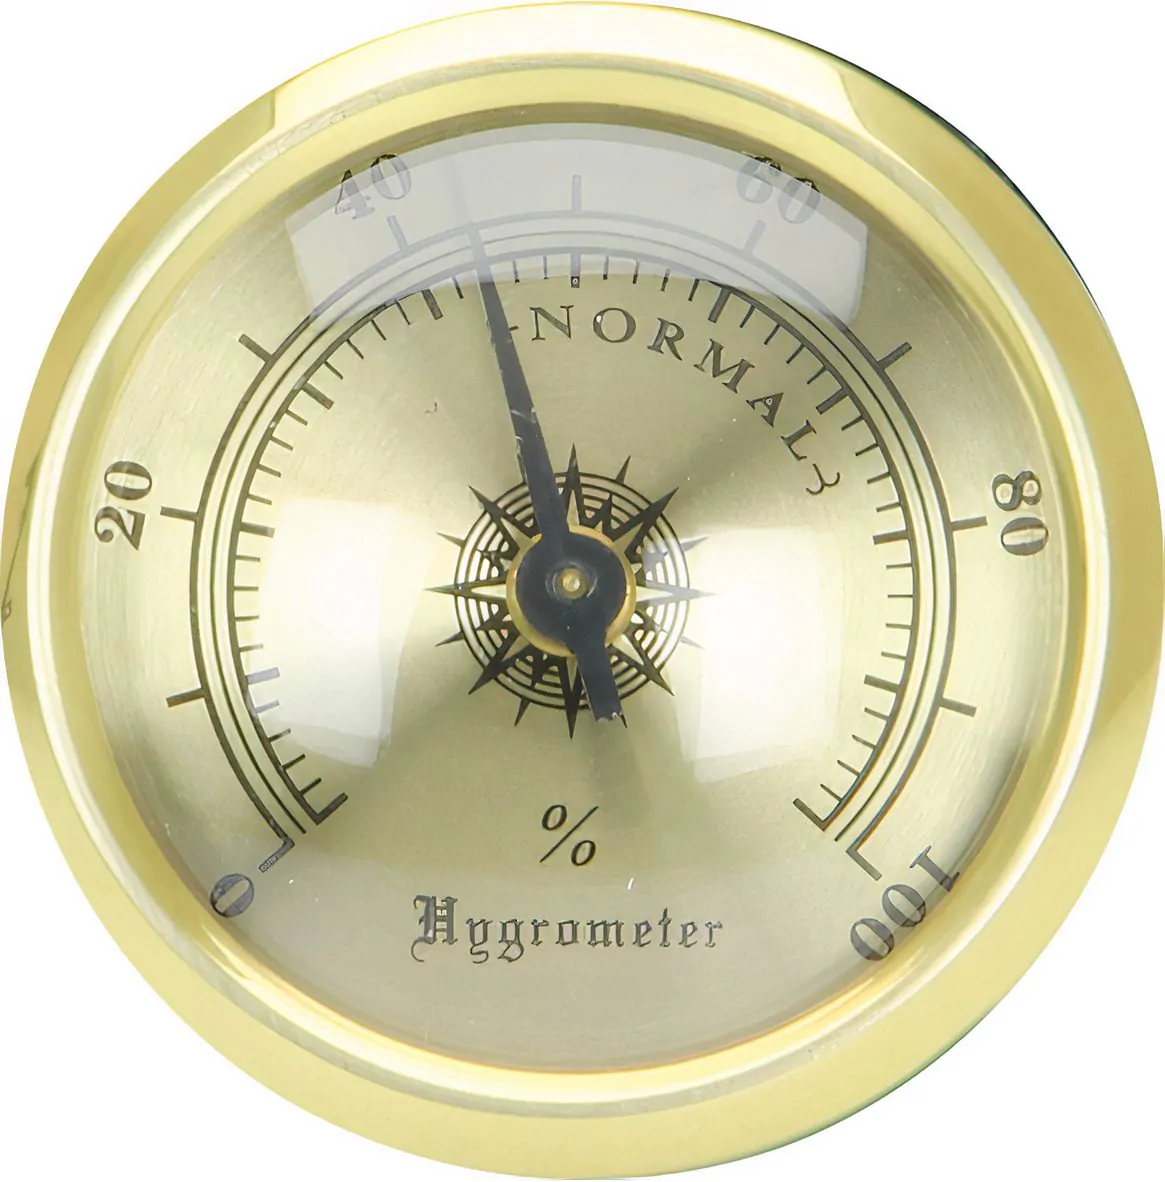 Gold Round Digital Hygrometer - With Calibration Feature (Gold